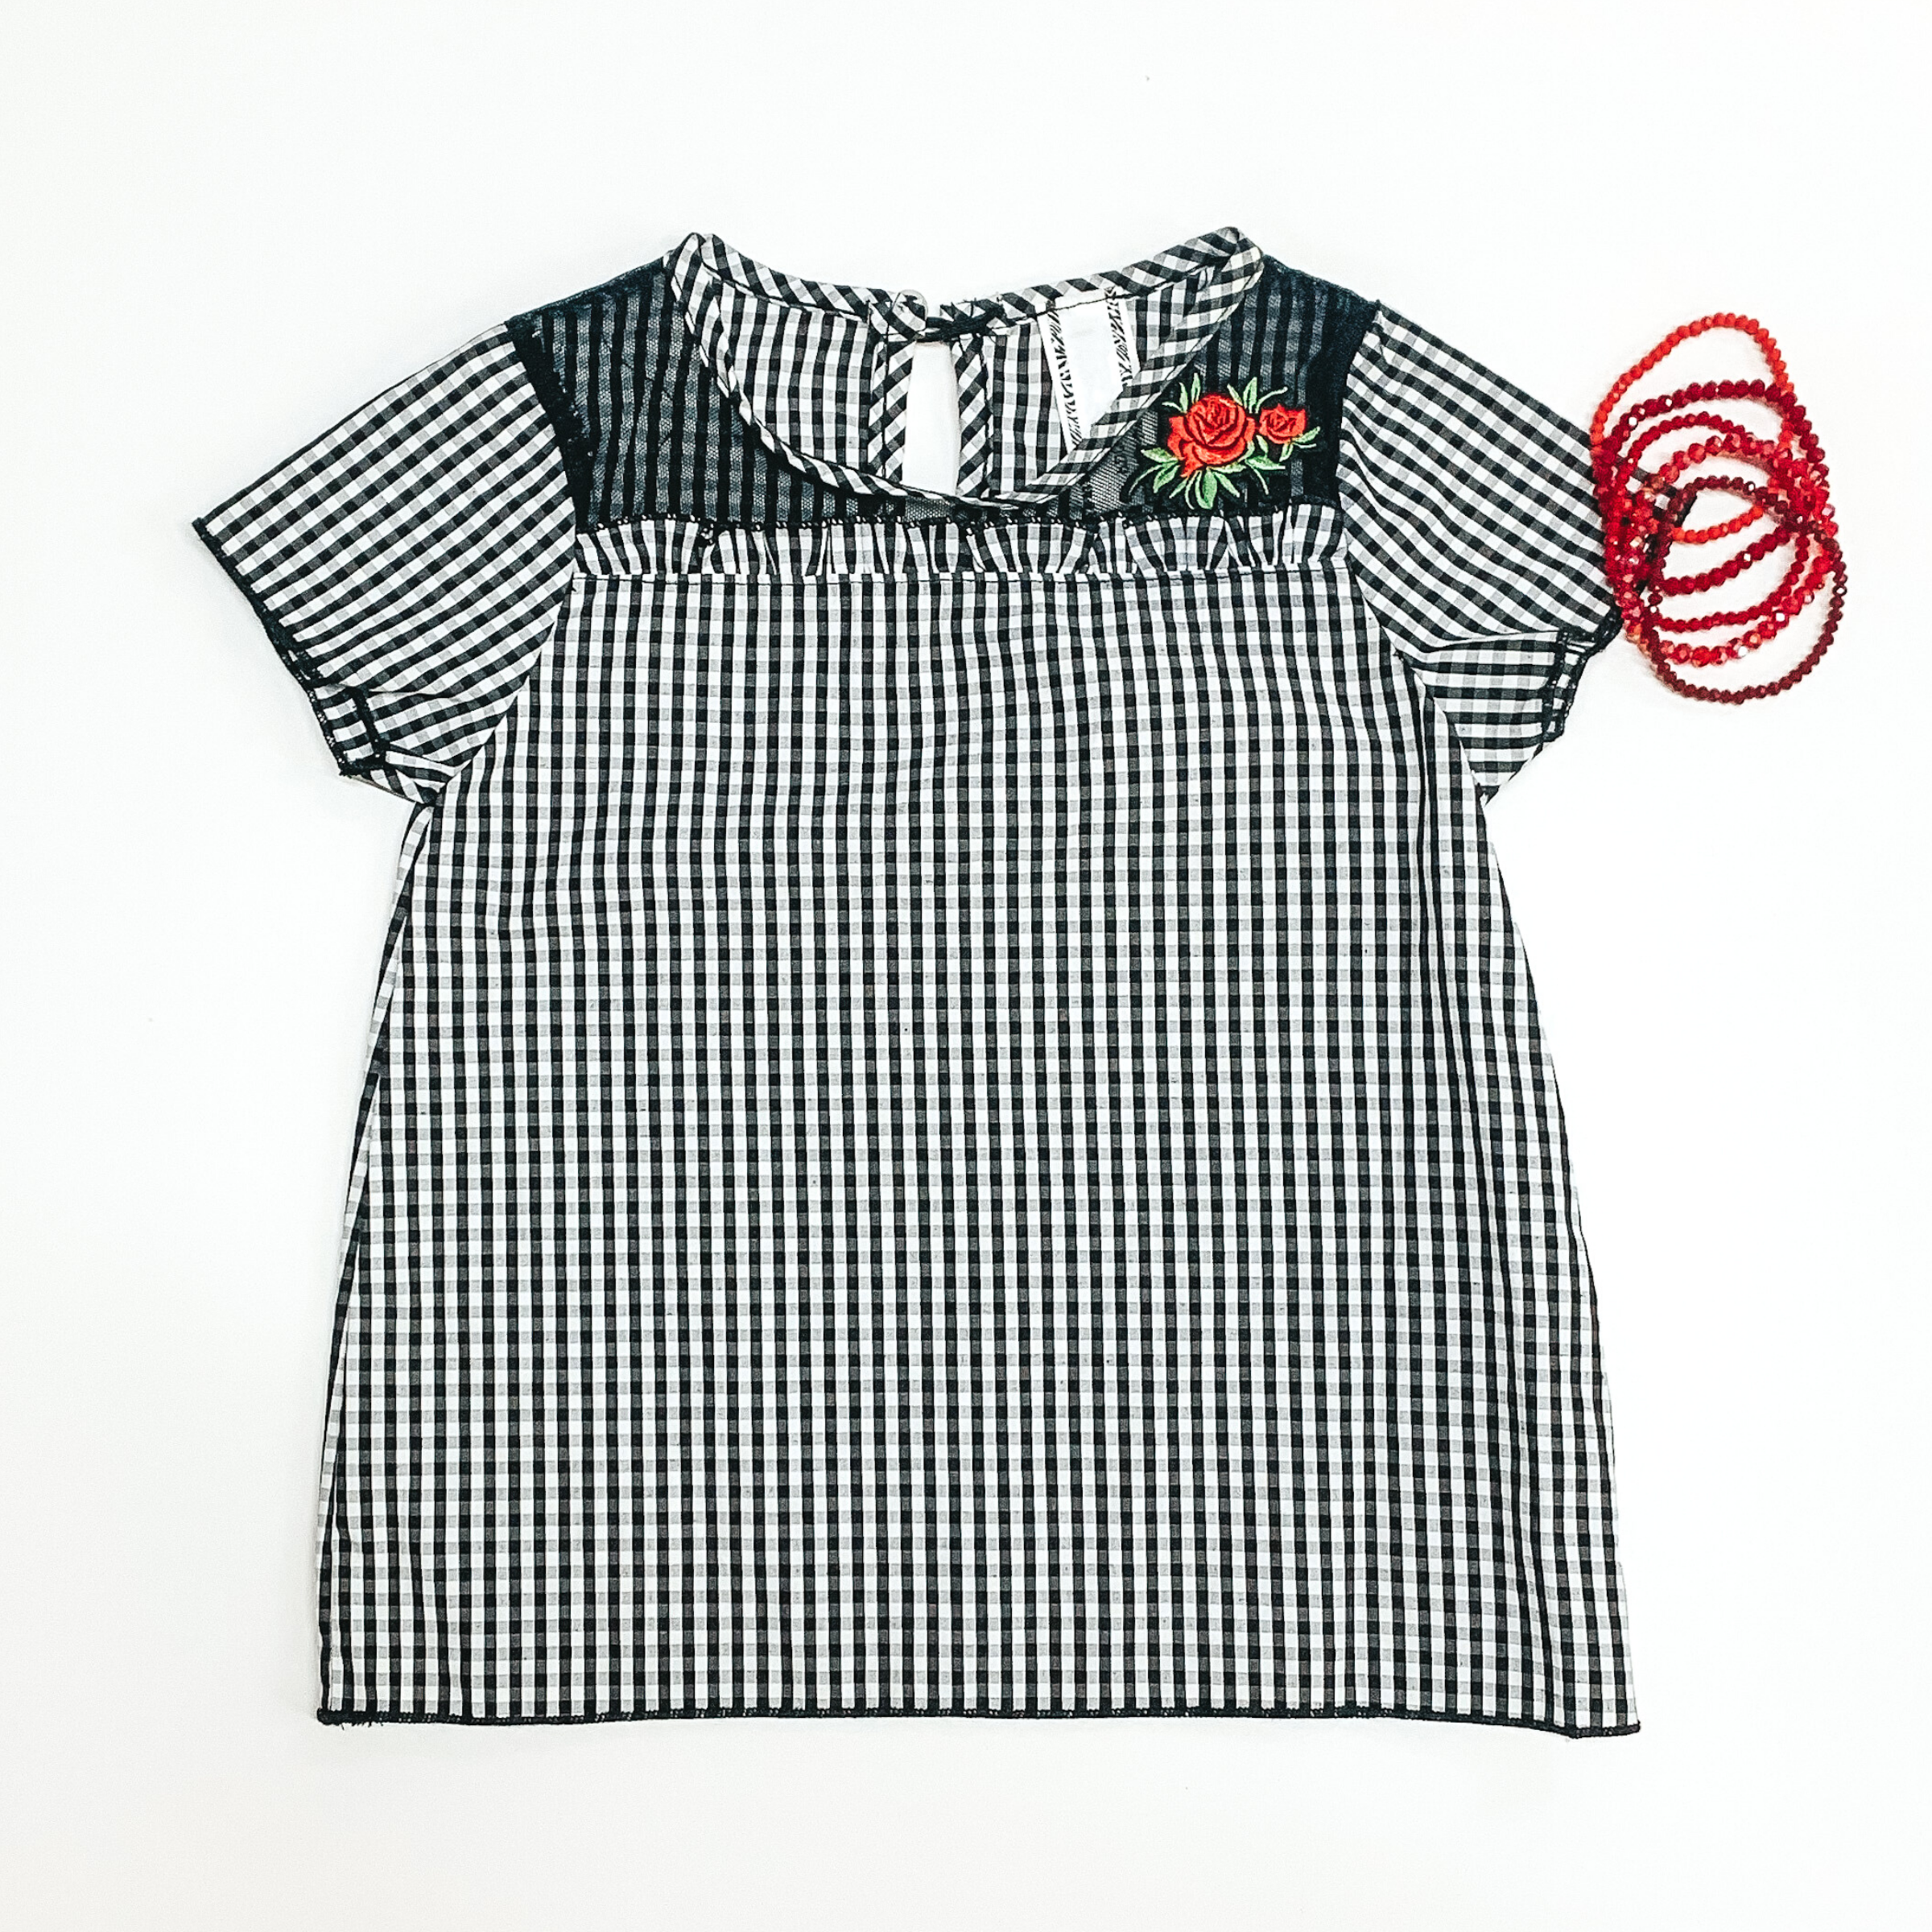 Little Kid's Black and White Blouse with Rose Detailing